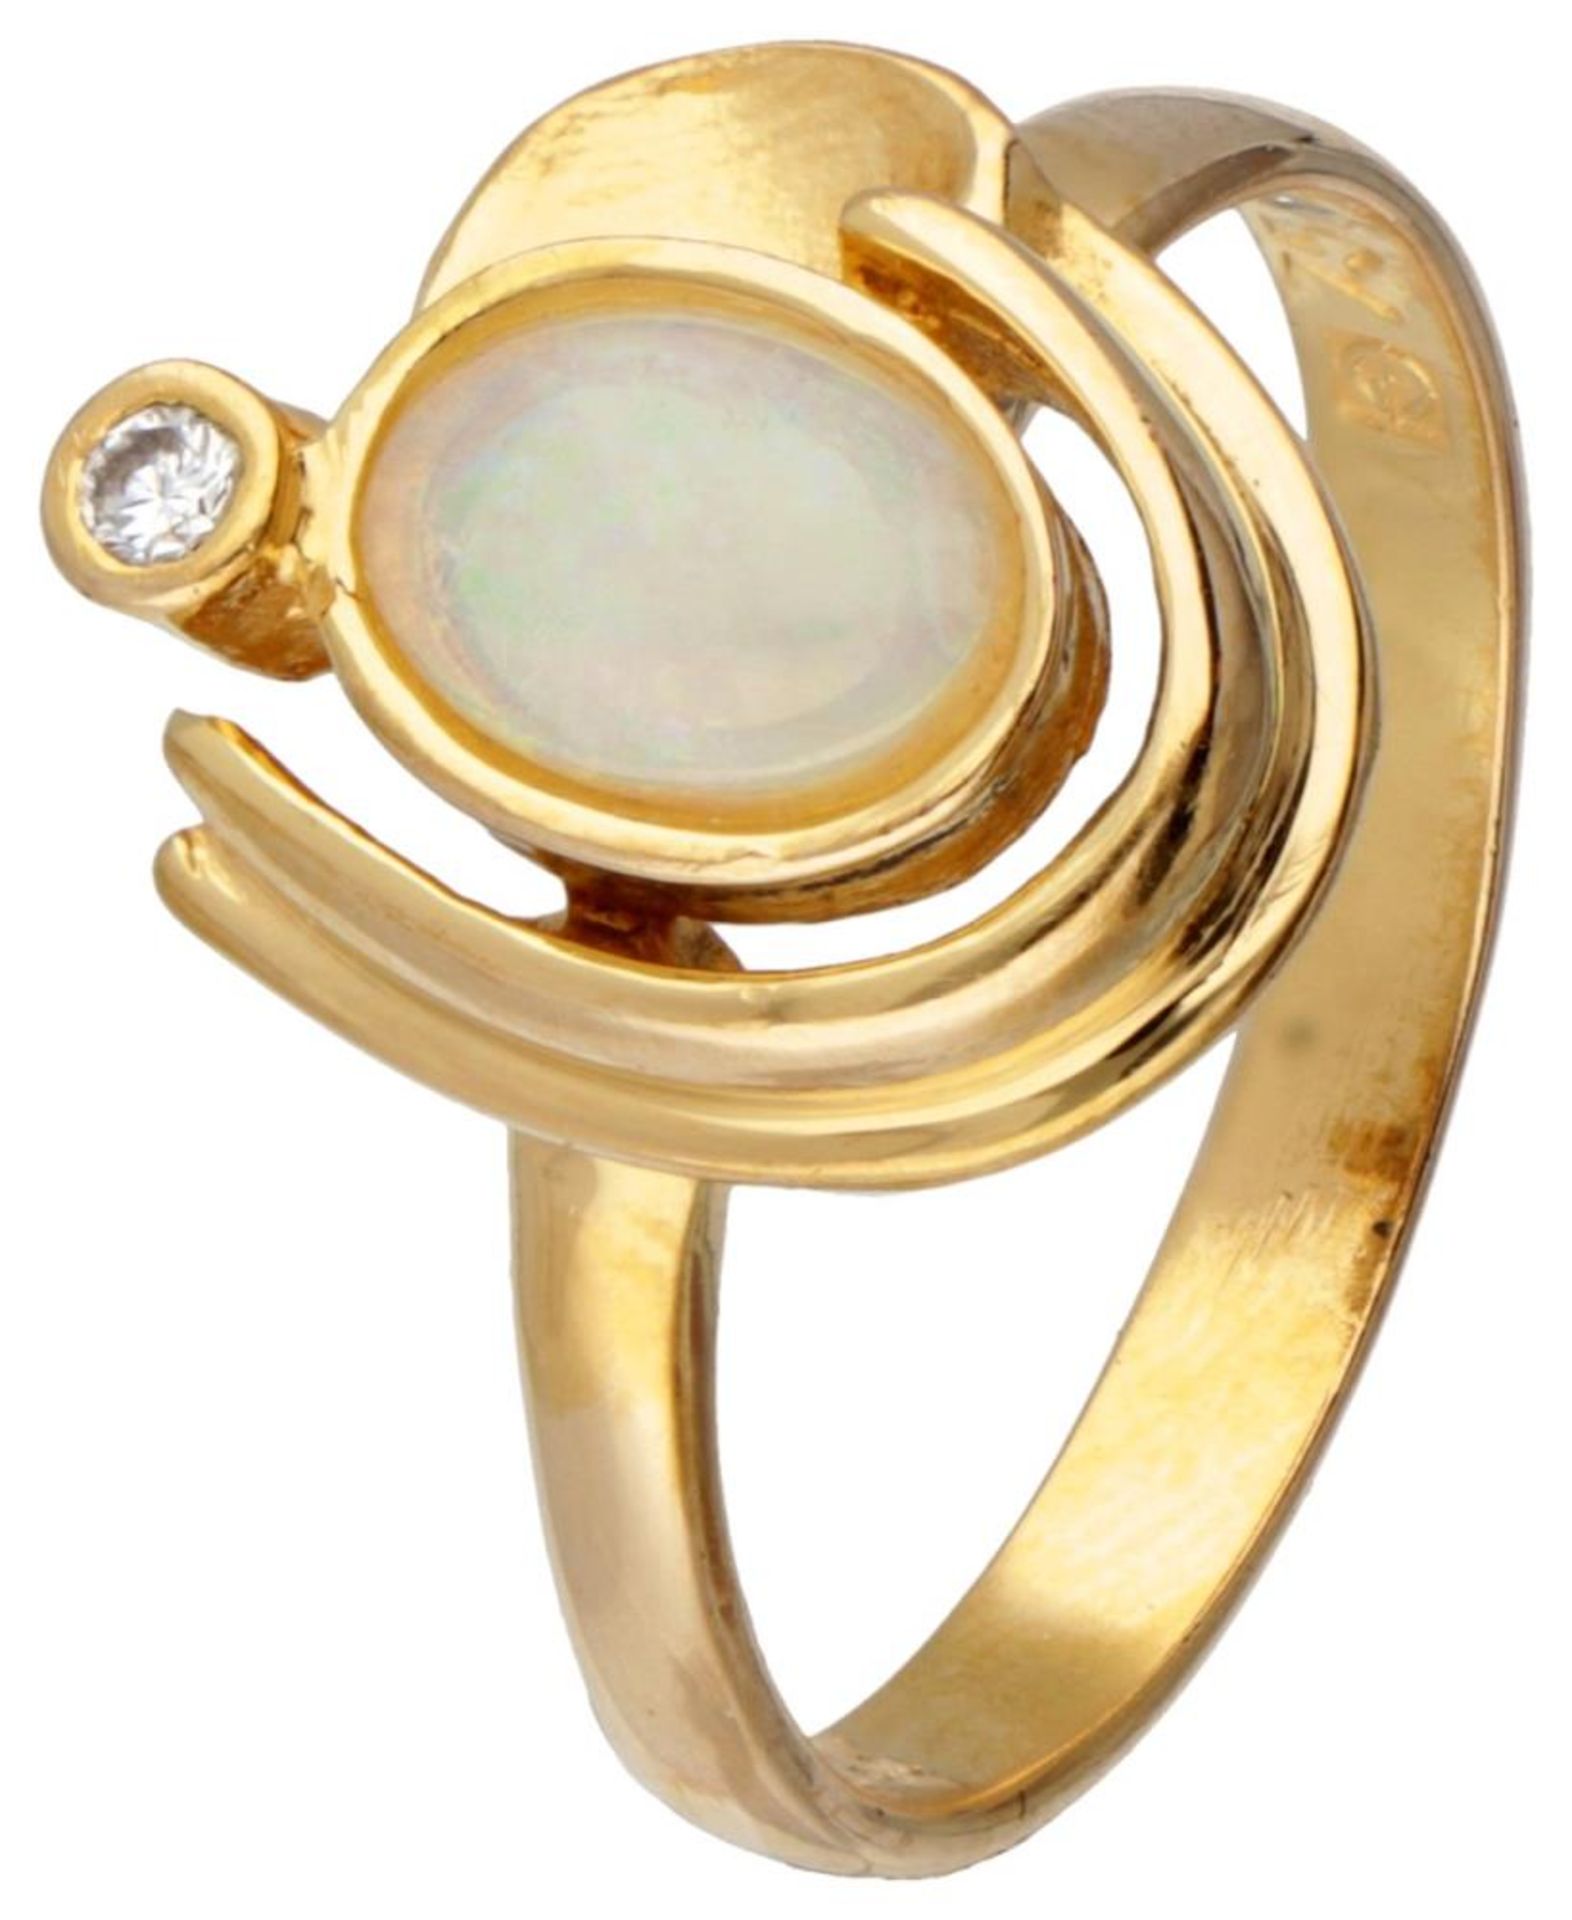 18K. Yellow gold ring set with approx. 0.42 ct. welo opal and diamond.